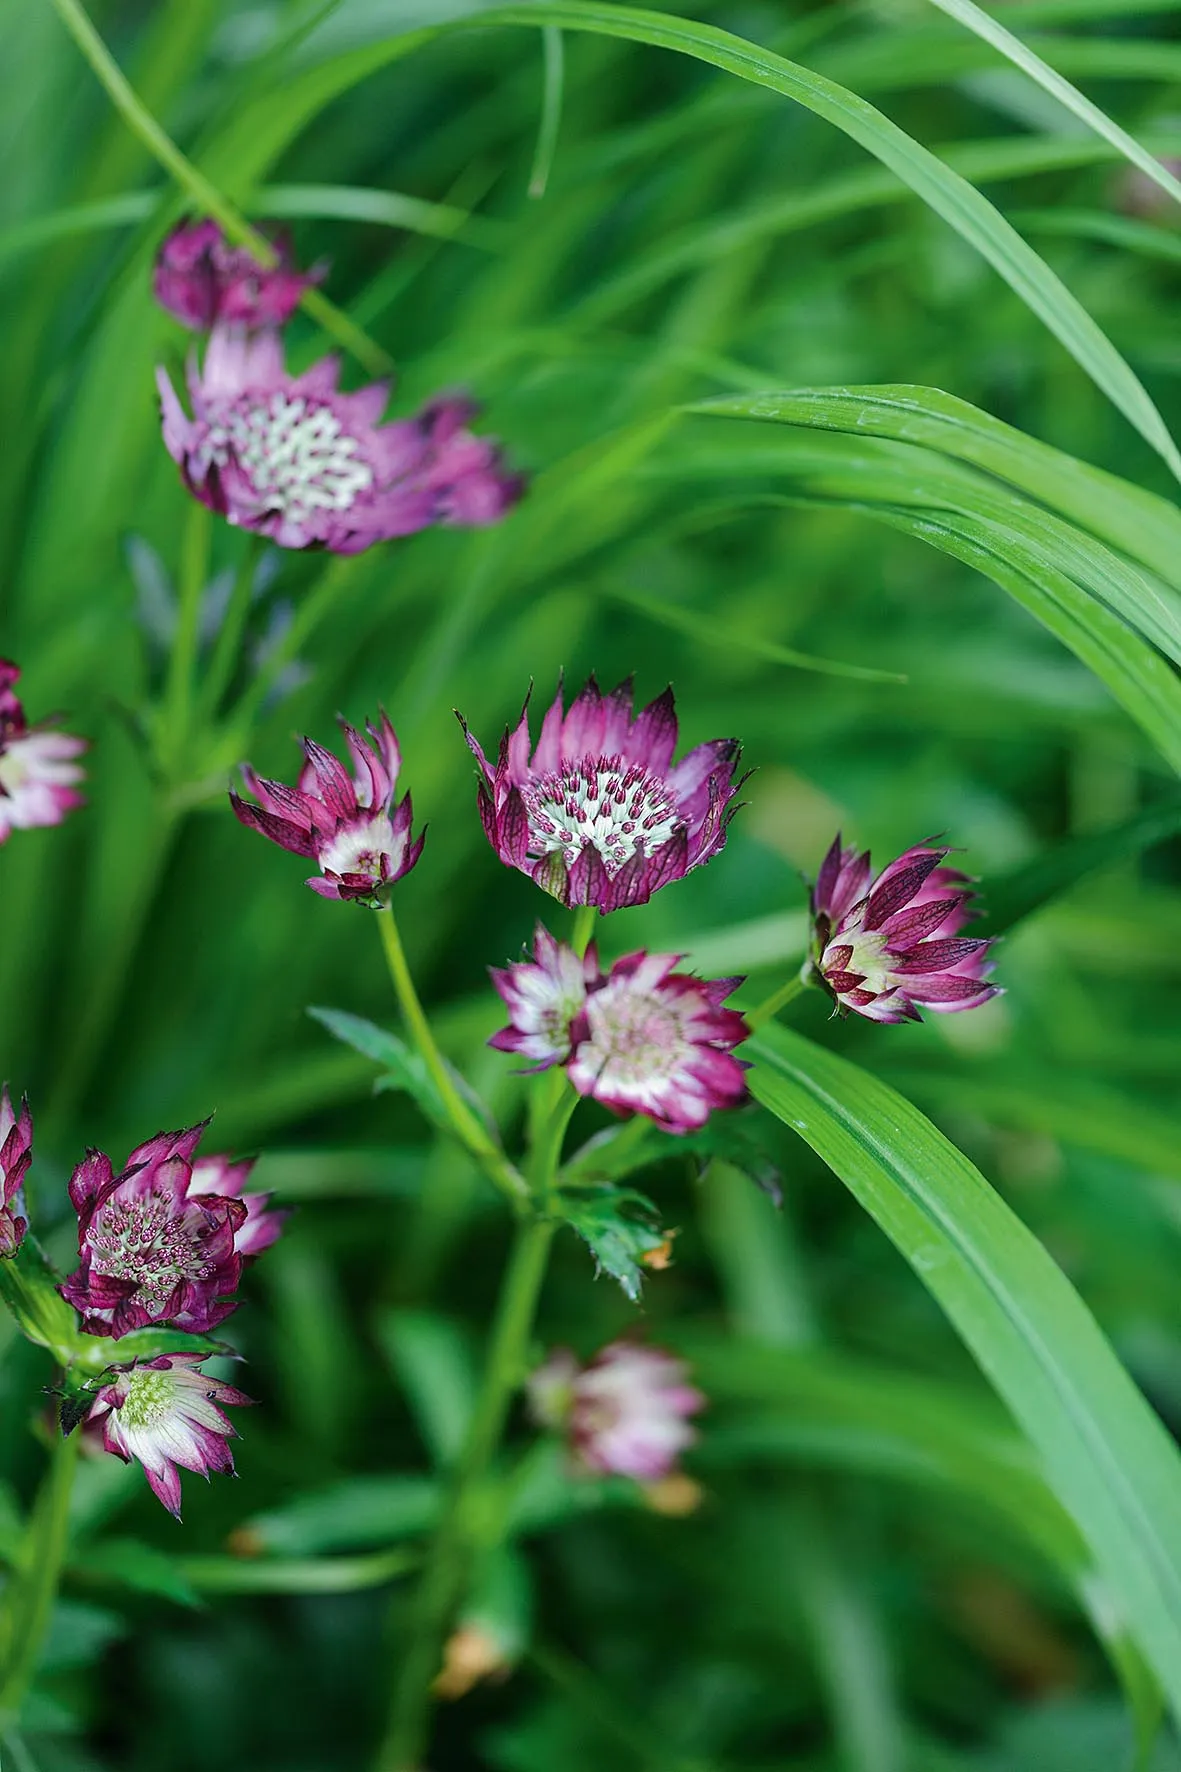 The feathery blooms of Astrantia major ‘Claret’.